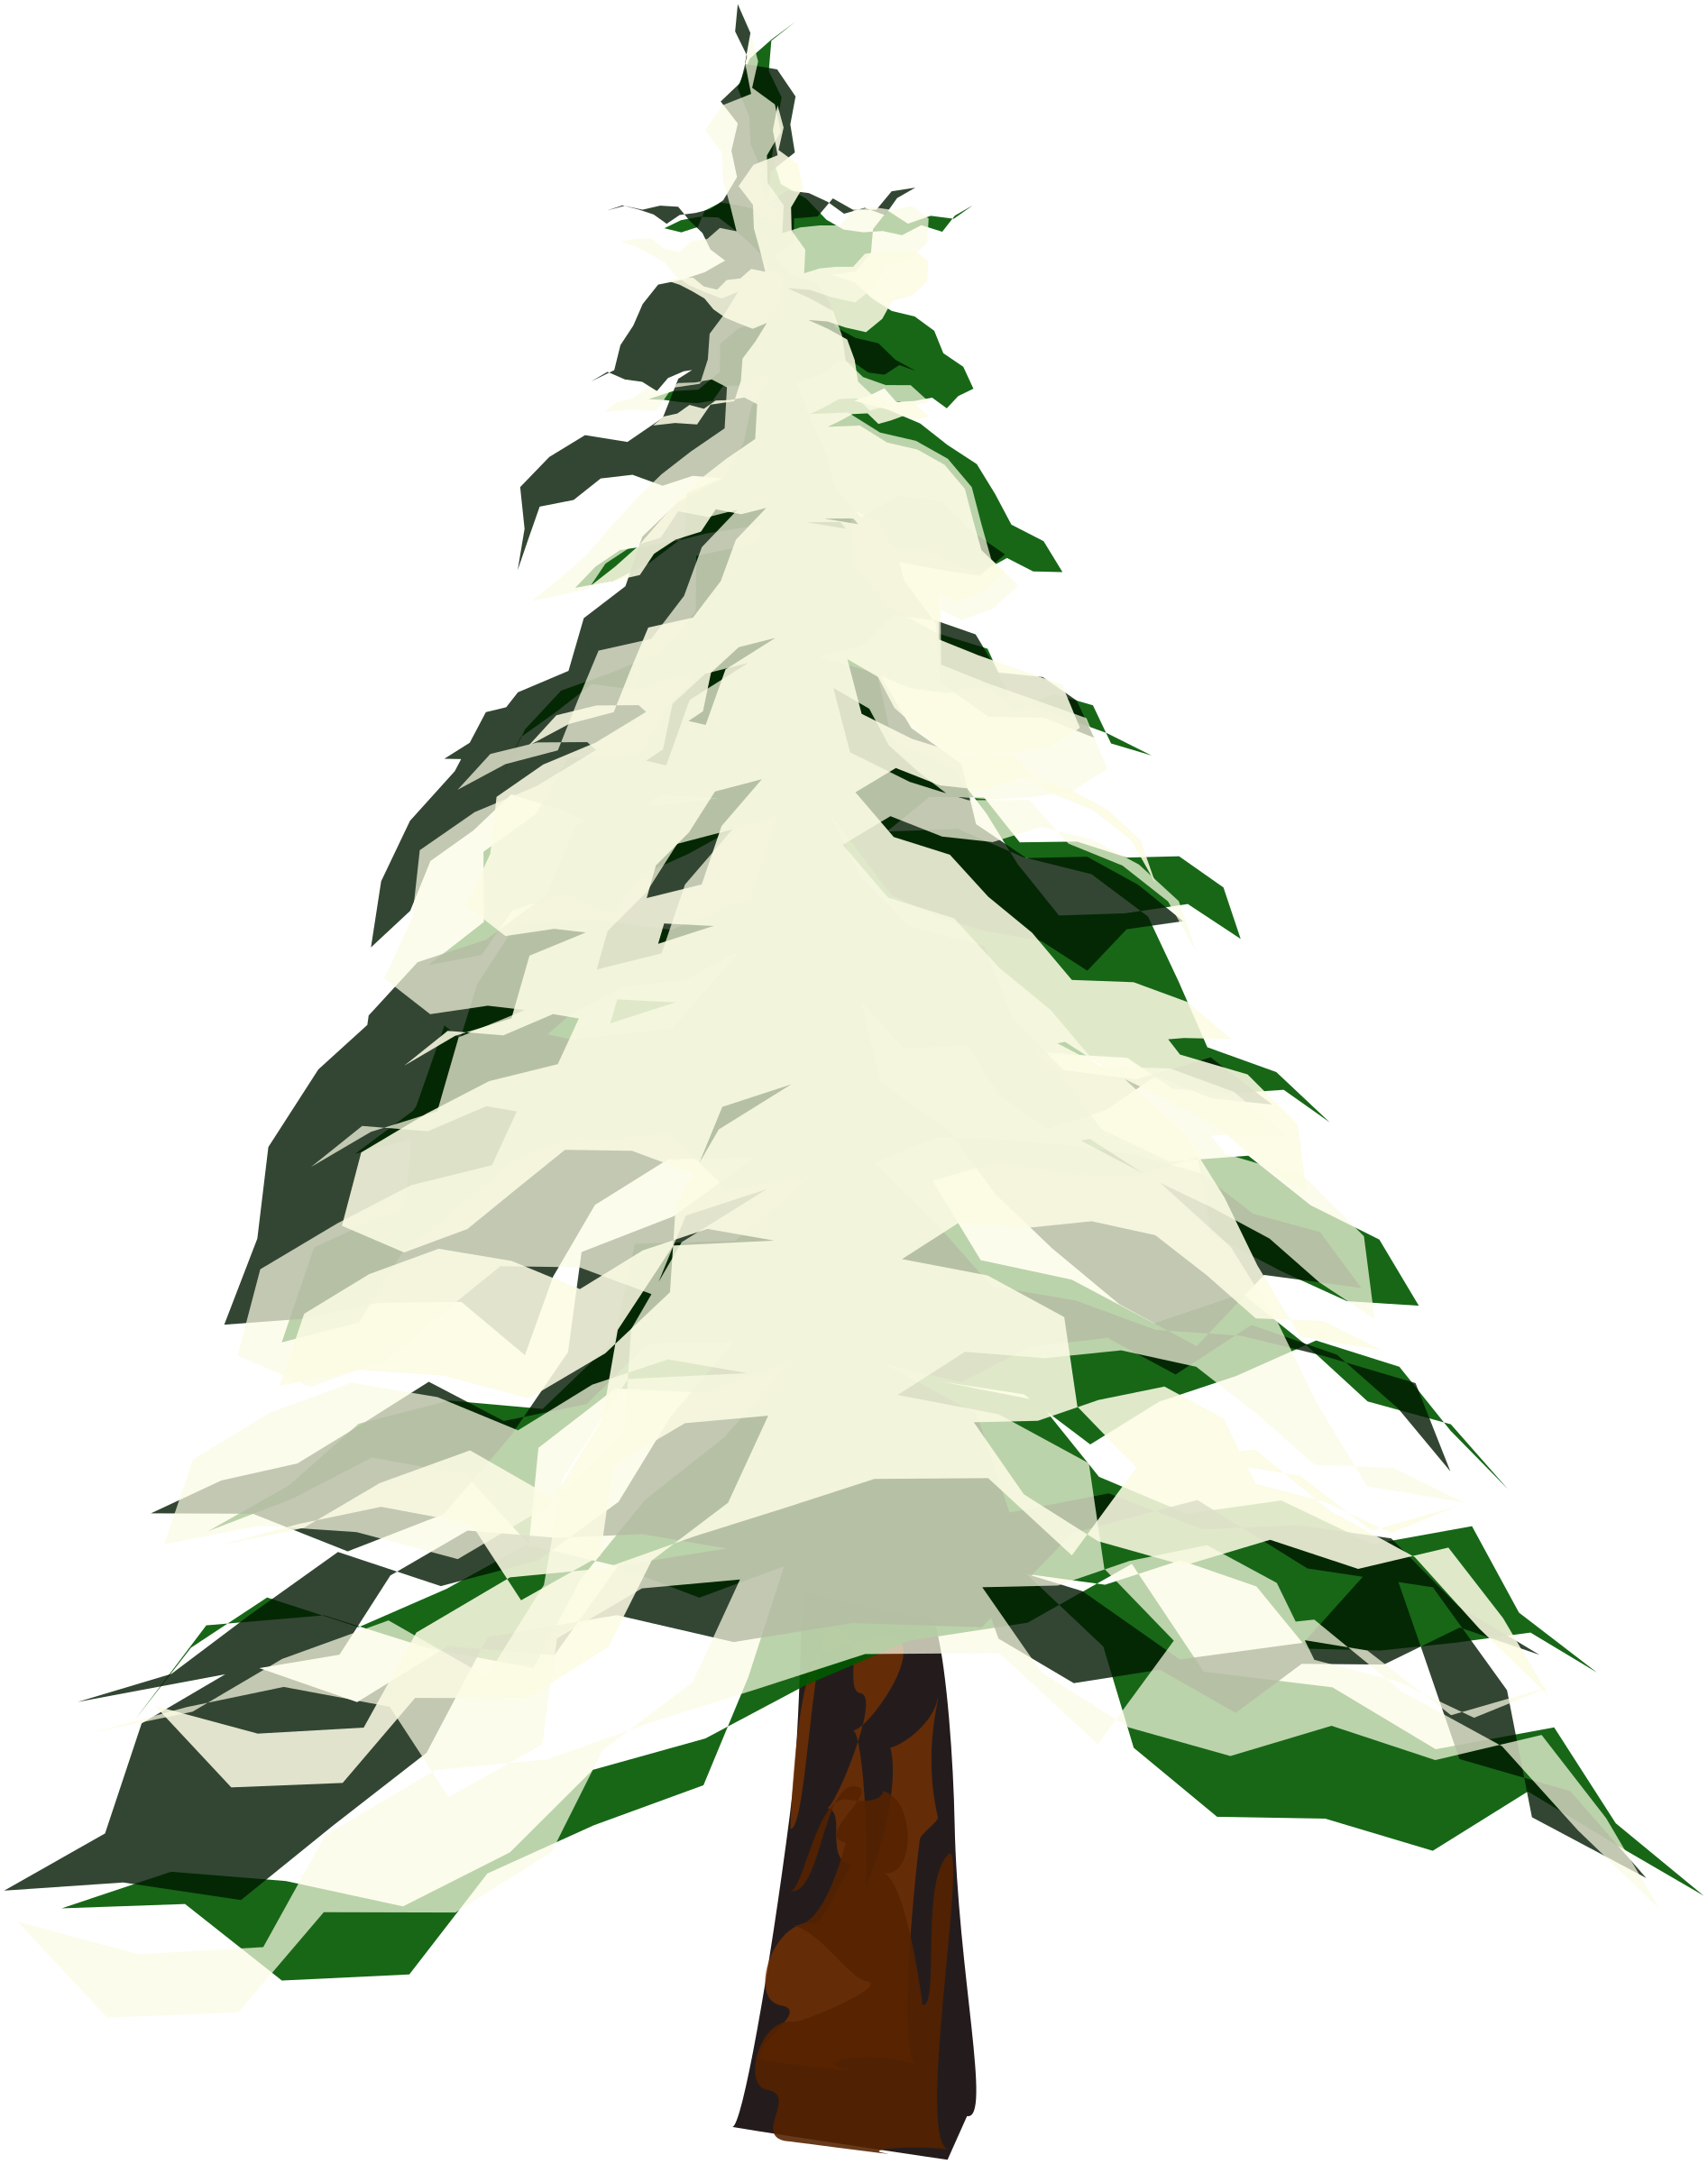 Tree big image png. Plants clipart winter